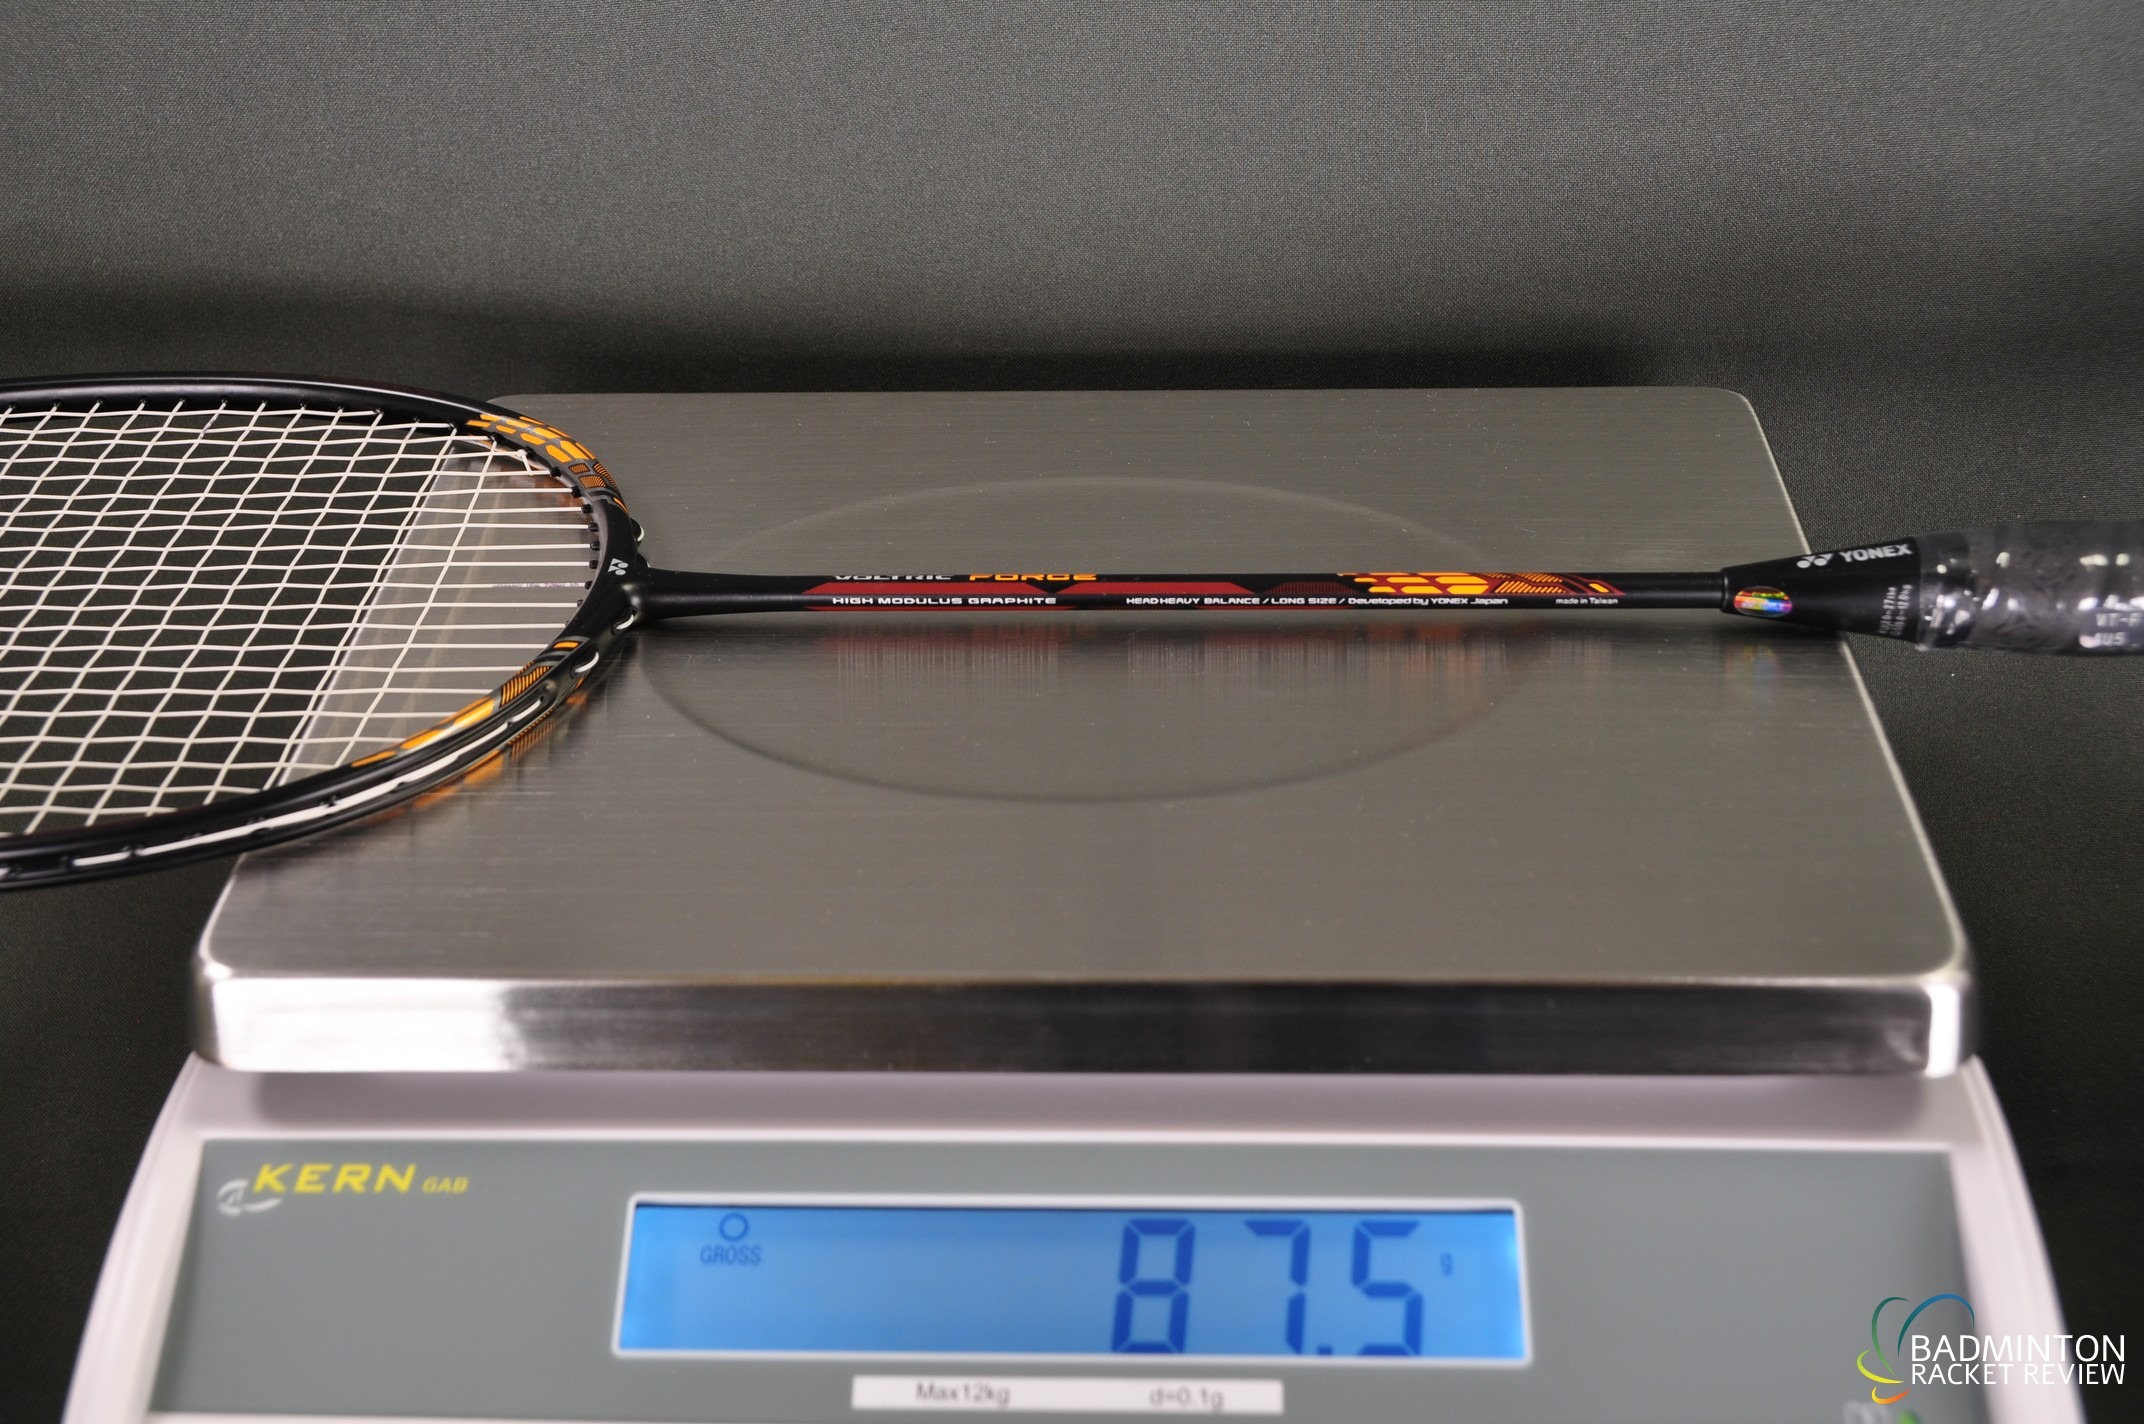 Weight Yonex Voltric Force -